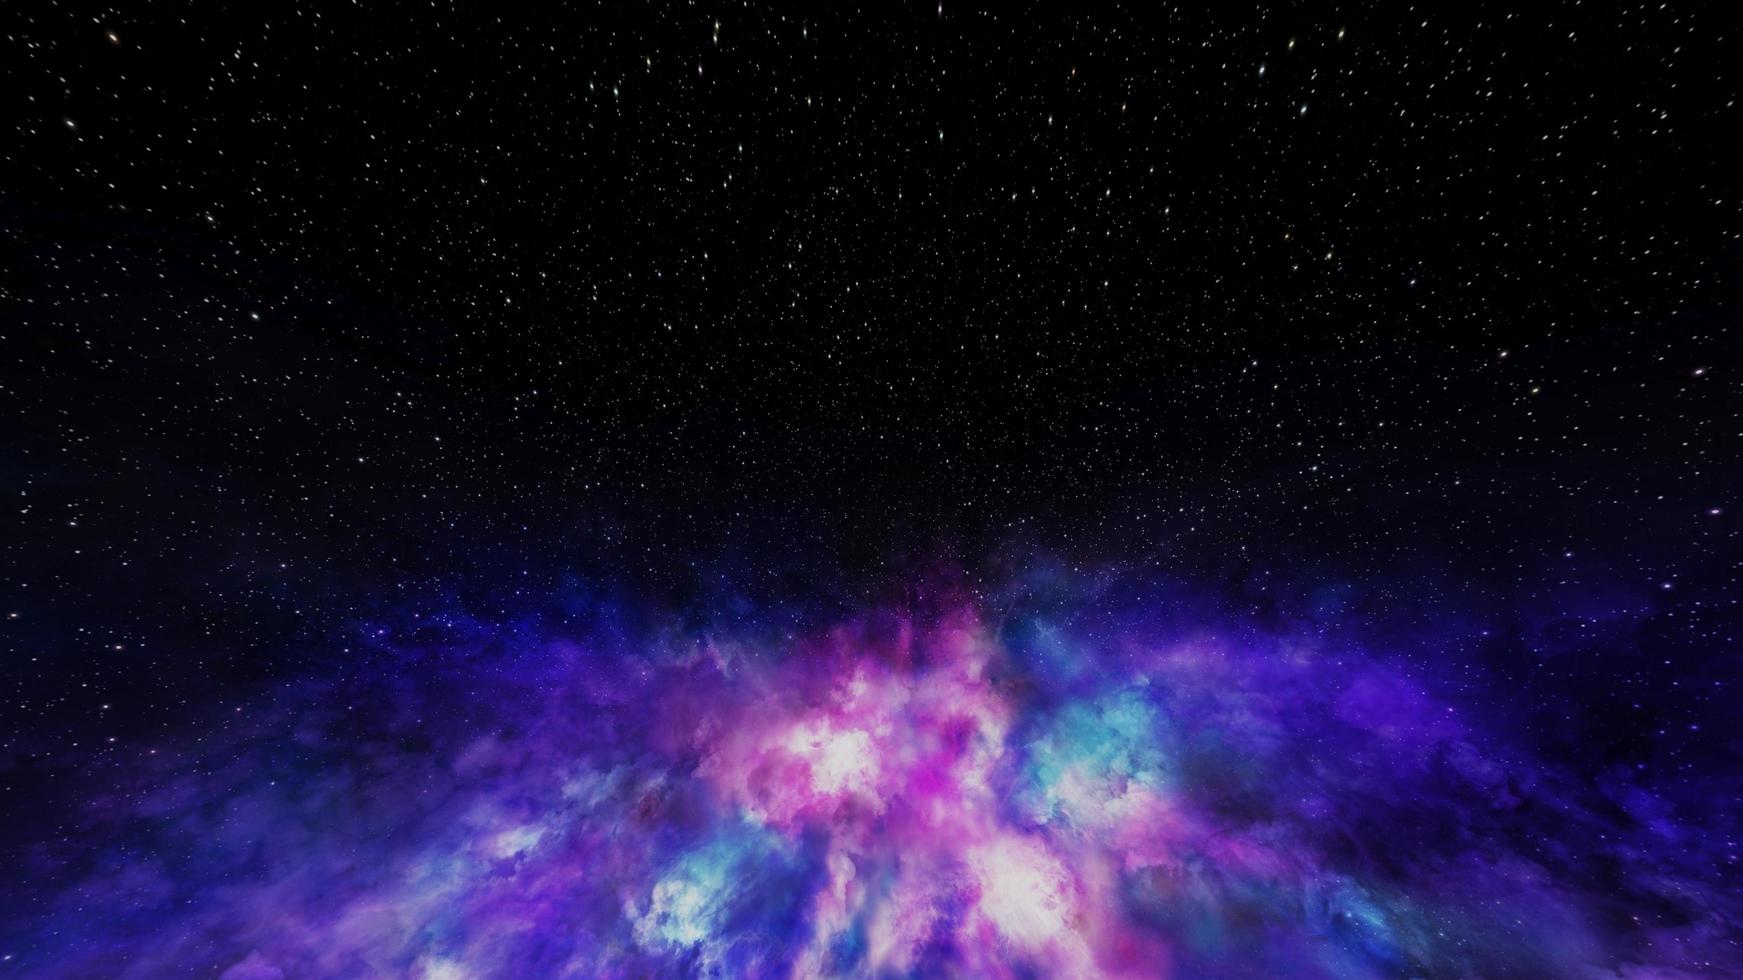 Night beutyful color Space and star background photo